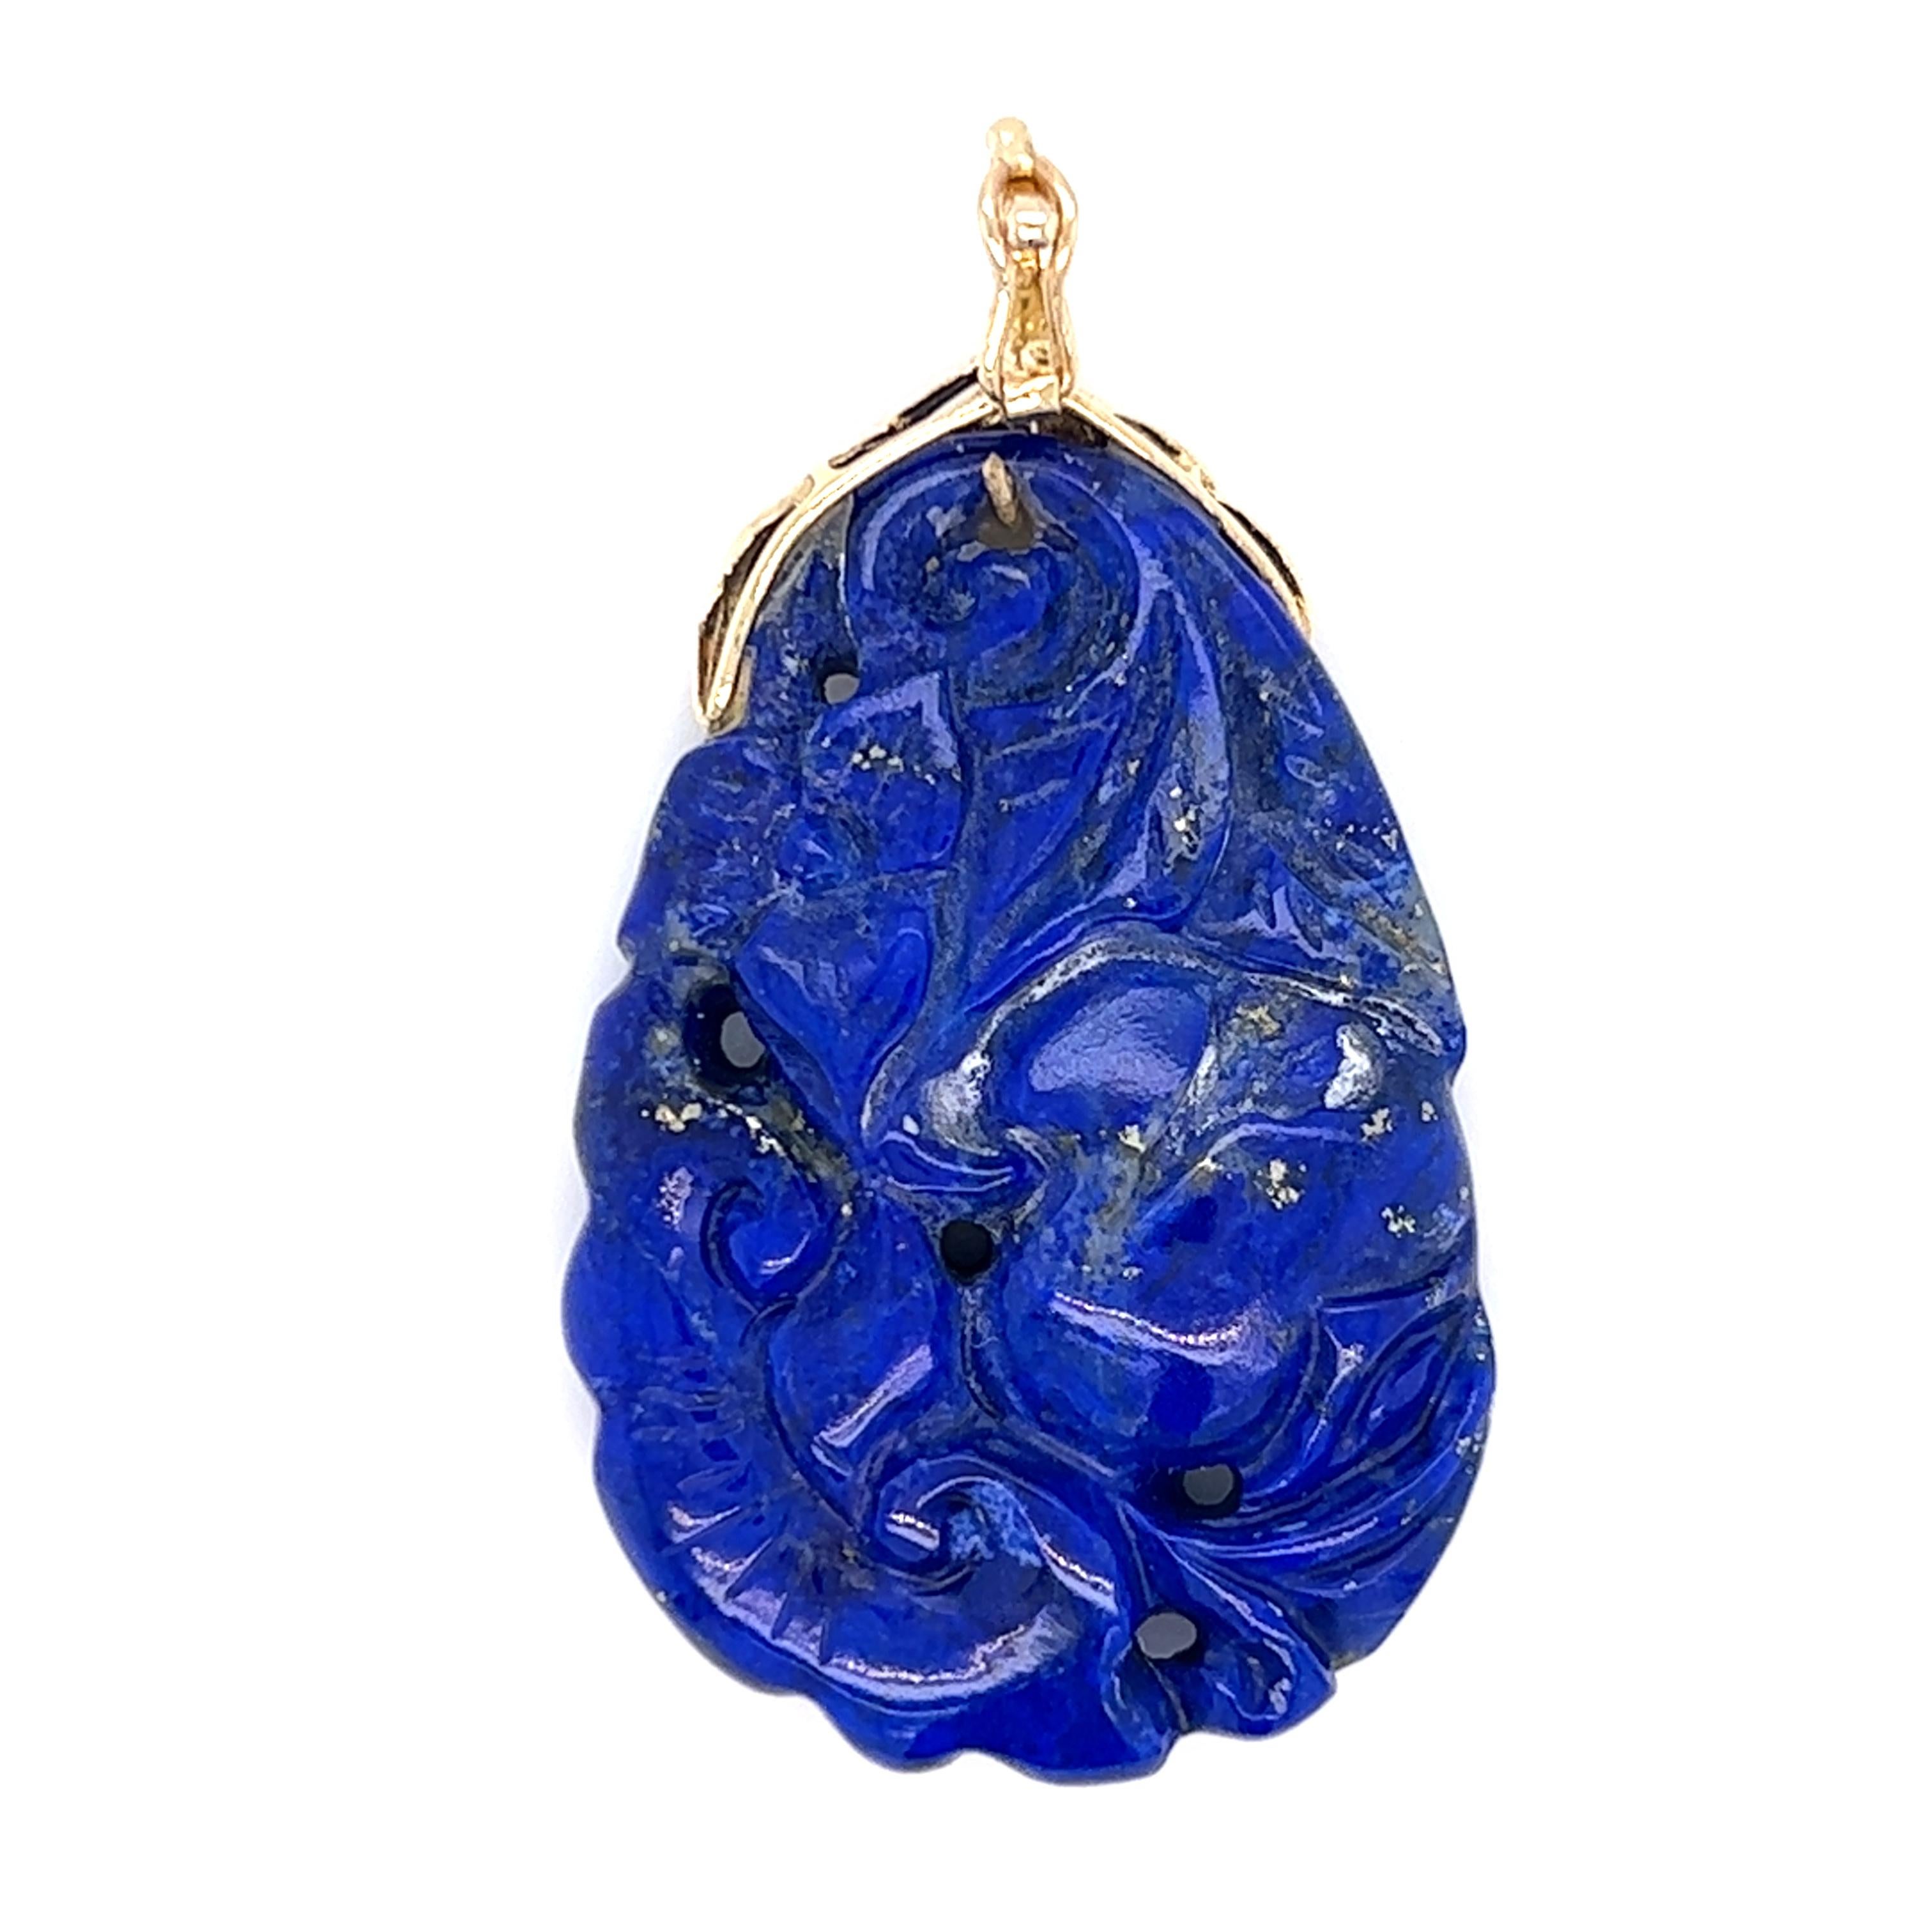 One carved lapis lazuli pendant set with one 14-karat yellow gold enhancer bail.  The pendant measures 1.5 long and one (1) inch wide.  